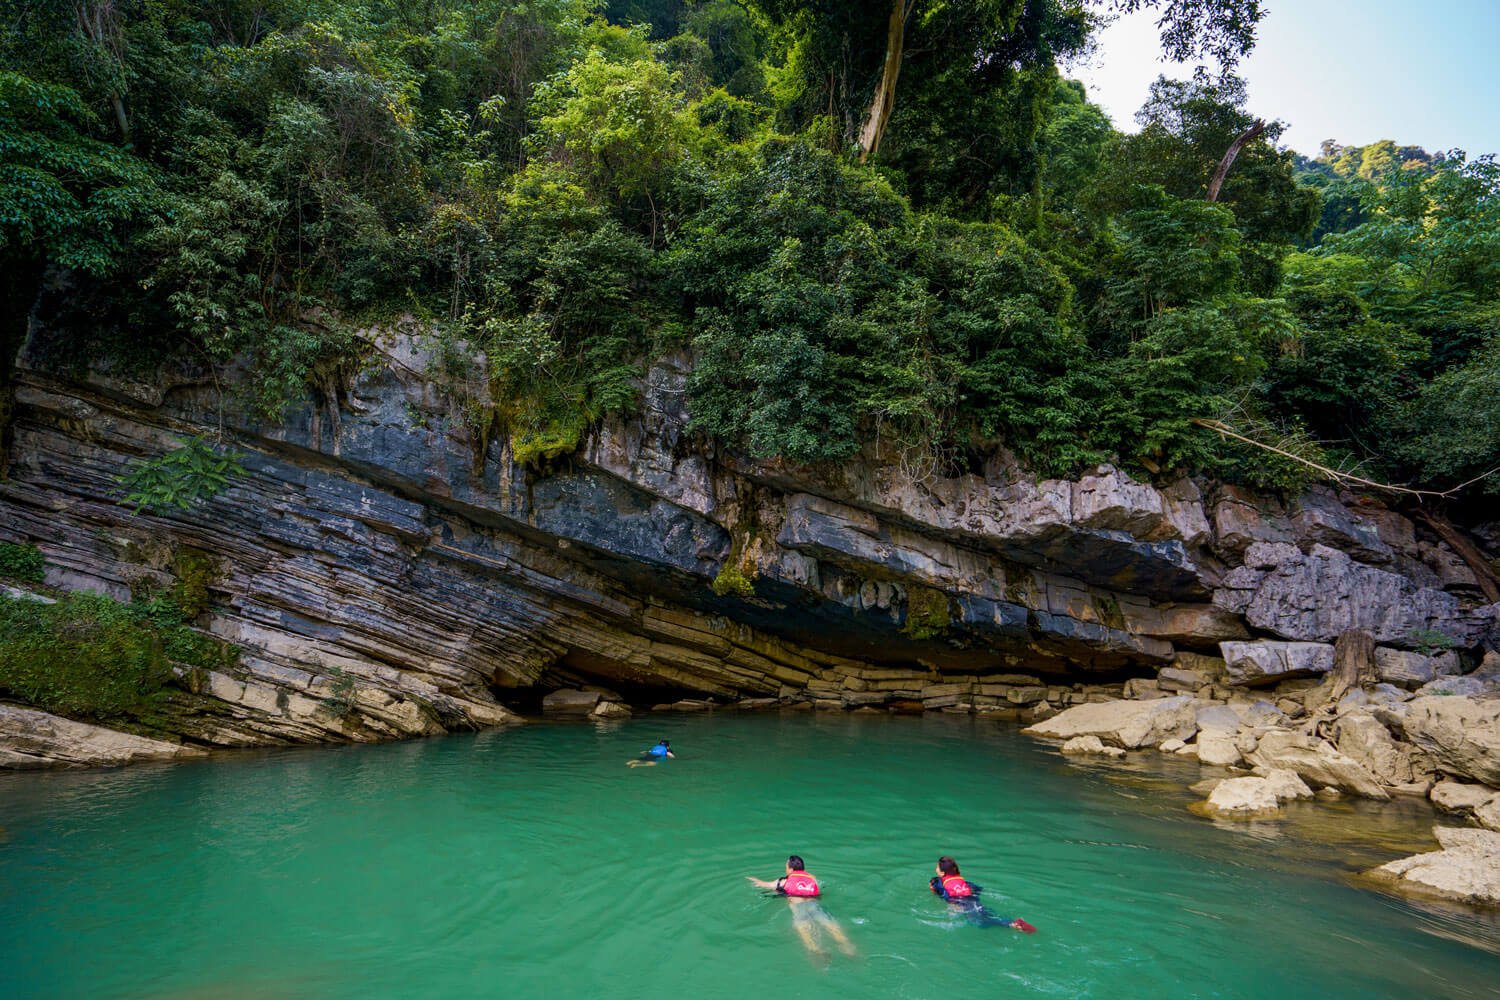 Swimming at the “natural infinity pool” on the left side of Hang Tien Campsite.